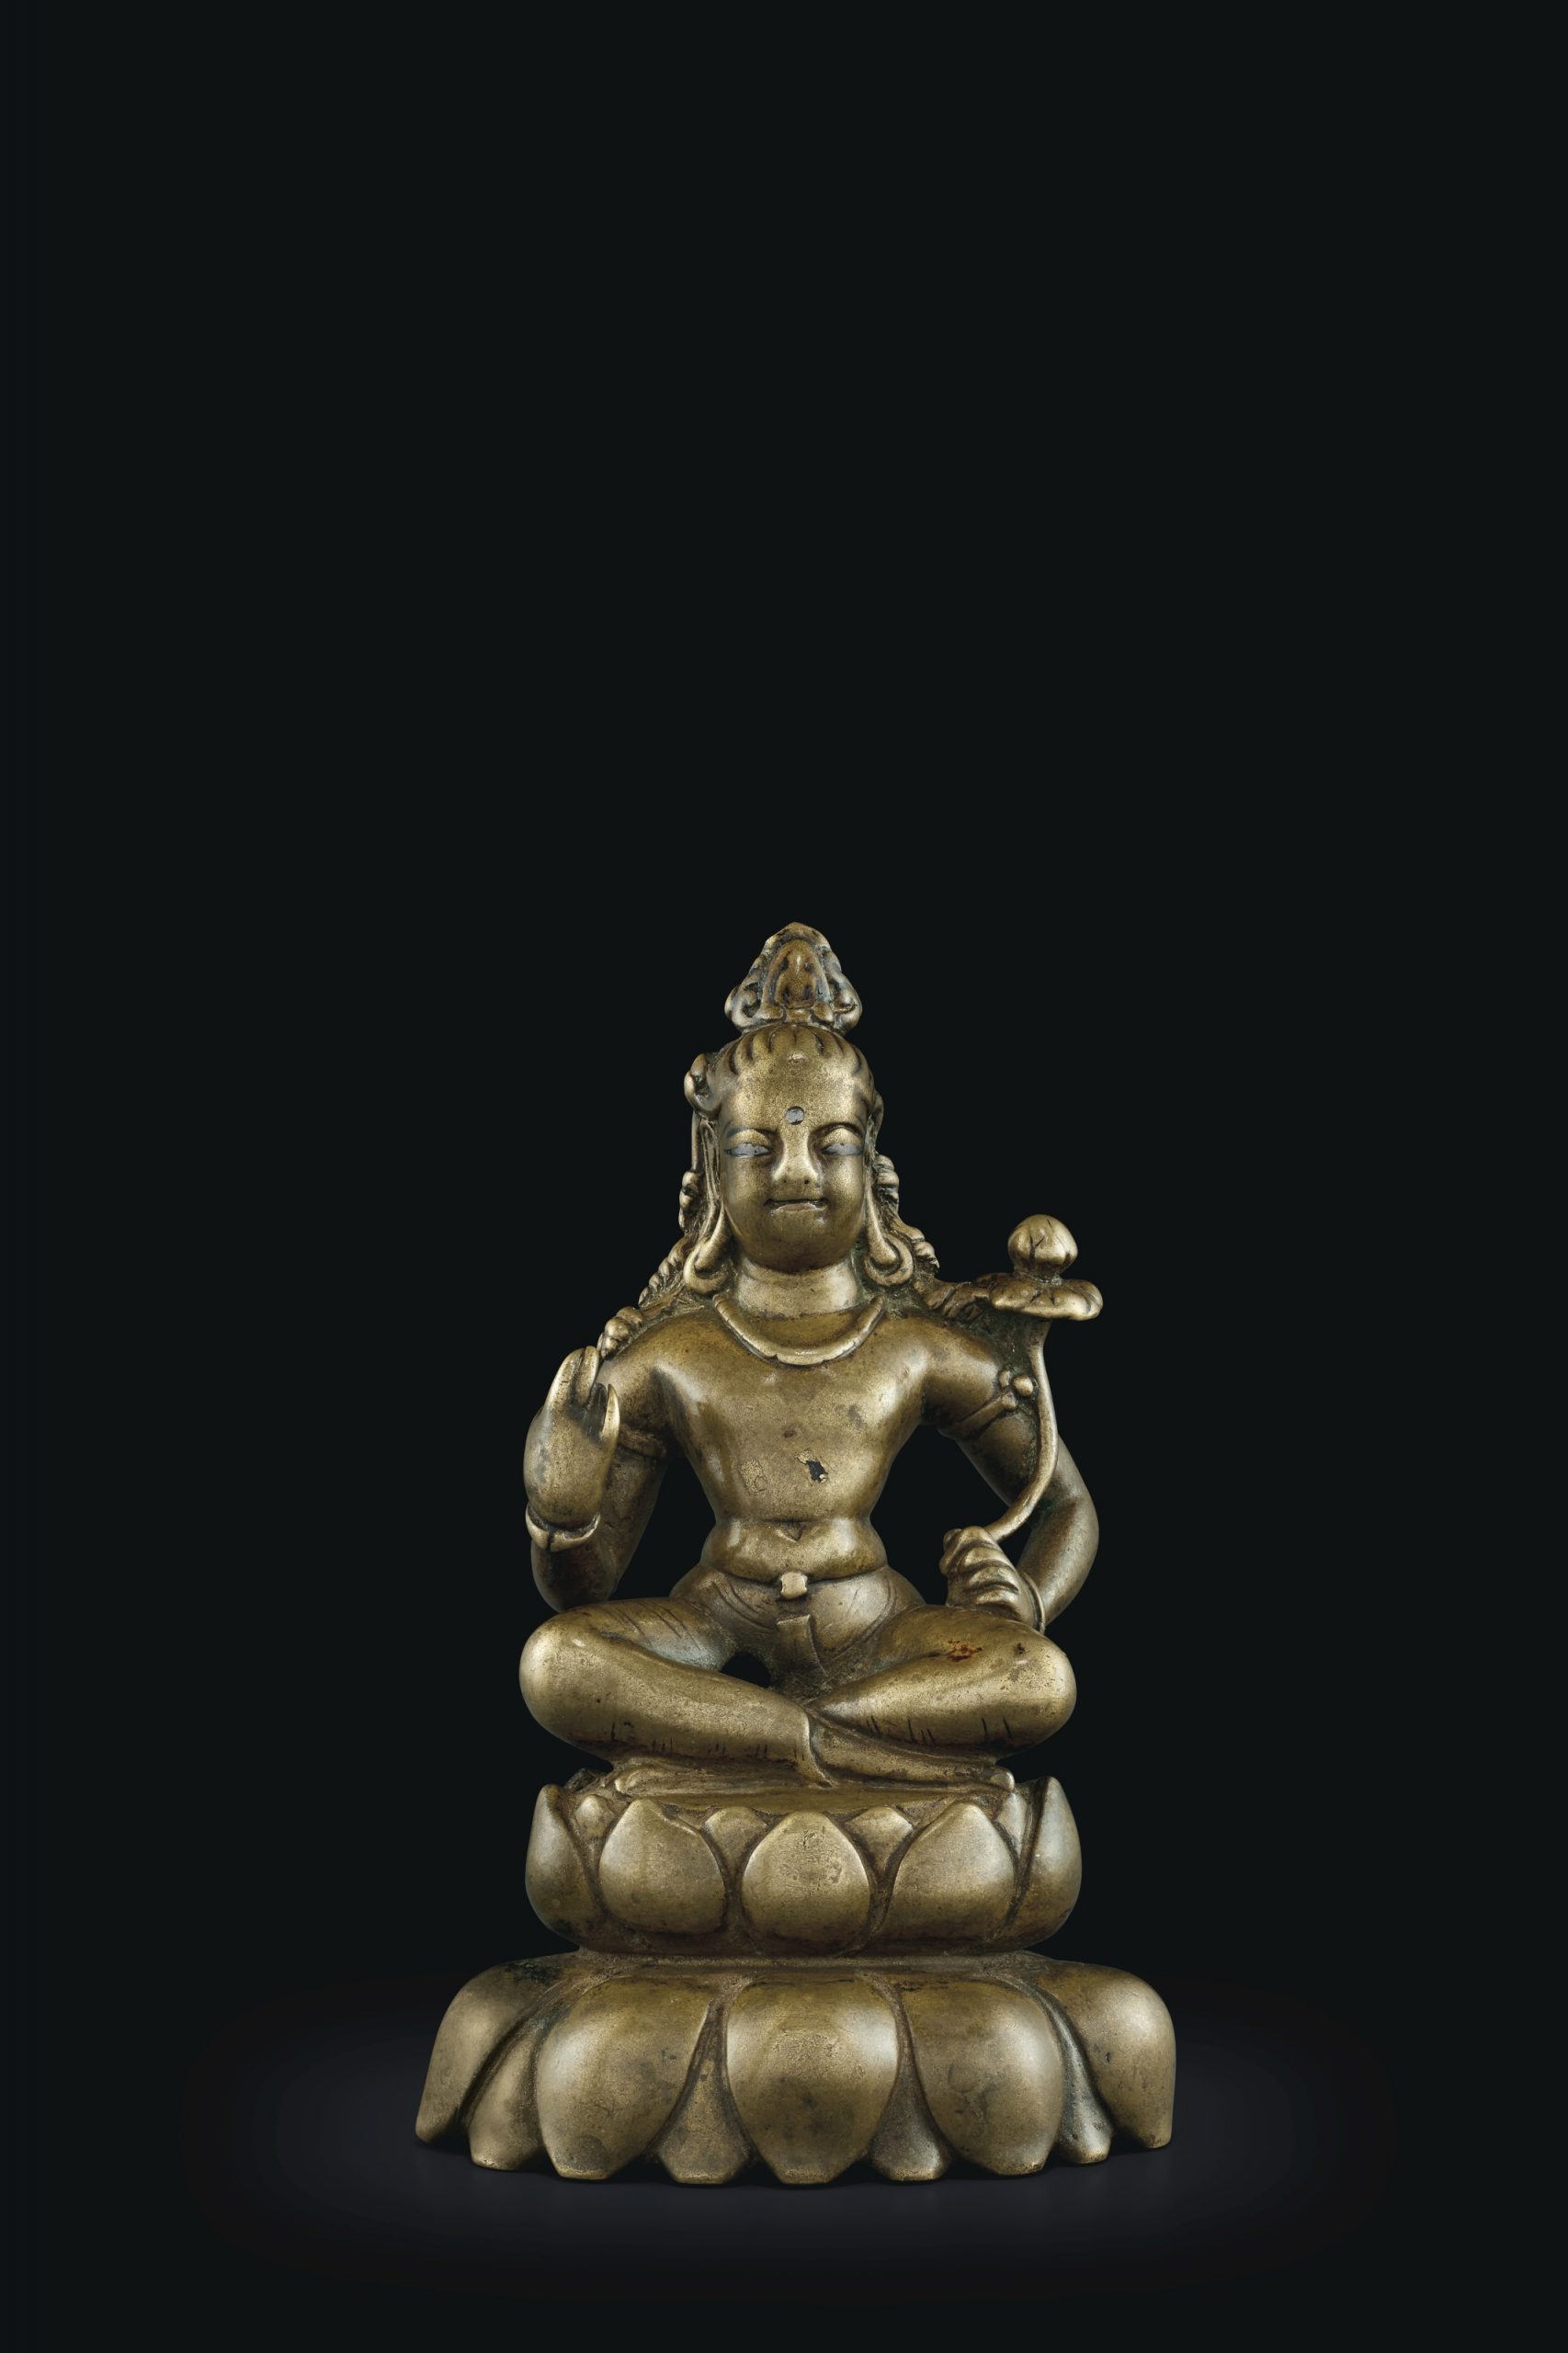 A COPPER- AND SILVER-INLAID BRONZE FIGURE OF PADMAPANI LOKESHVARA SWAT VALLEY, 8TH-9TH CENTURY 